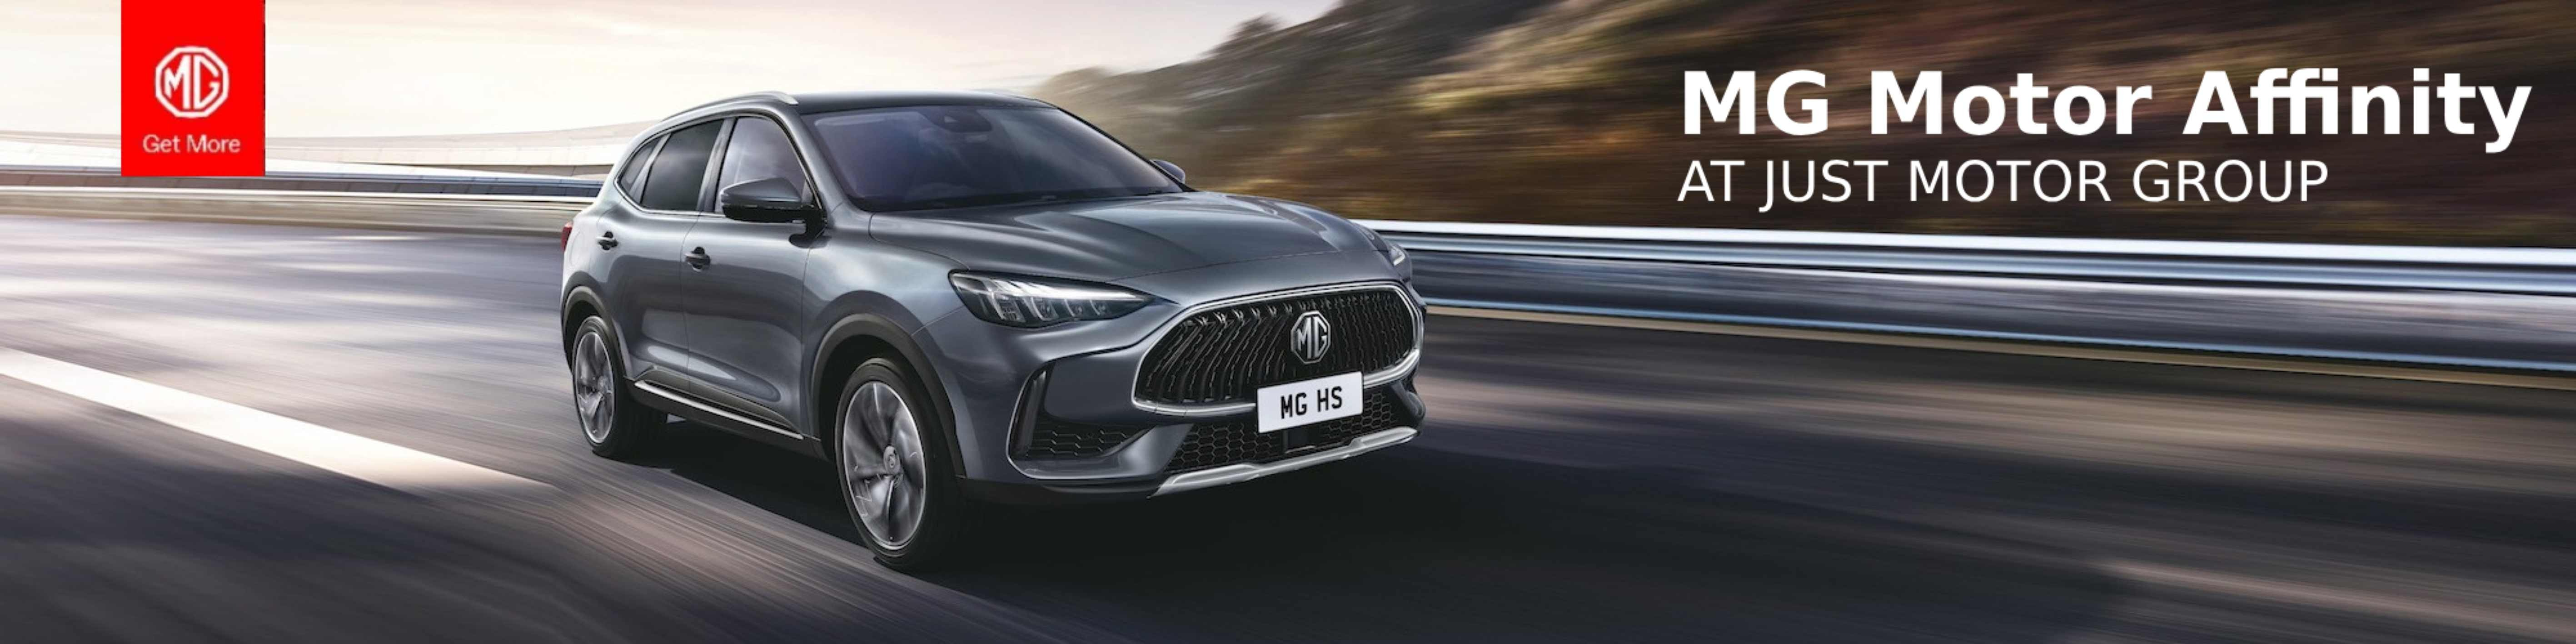 Latest MG Affinity Offers at Just Motor Group